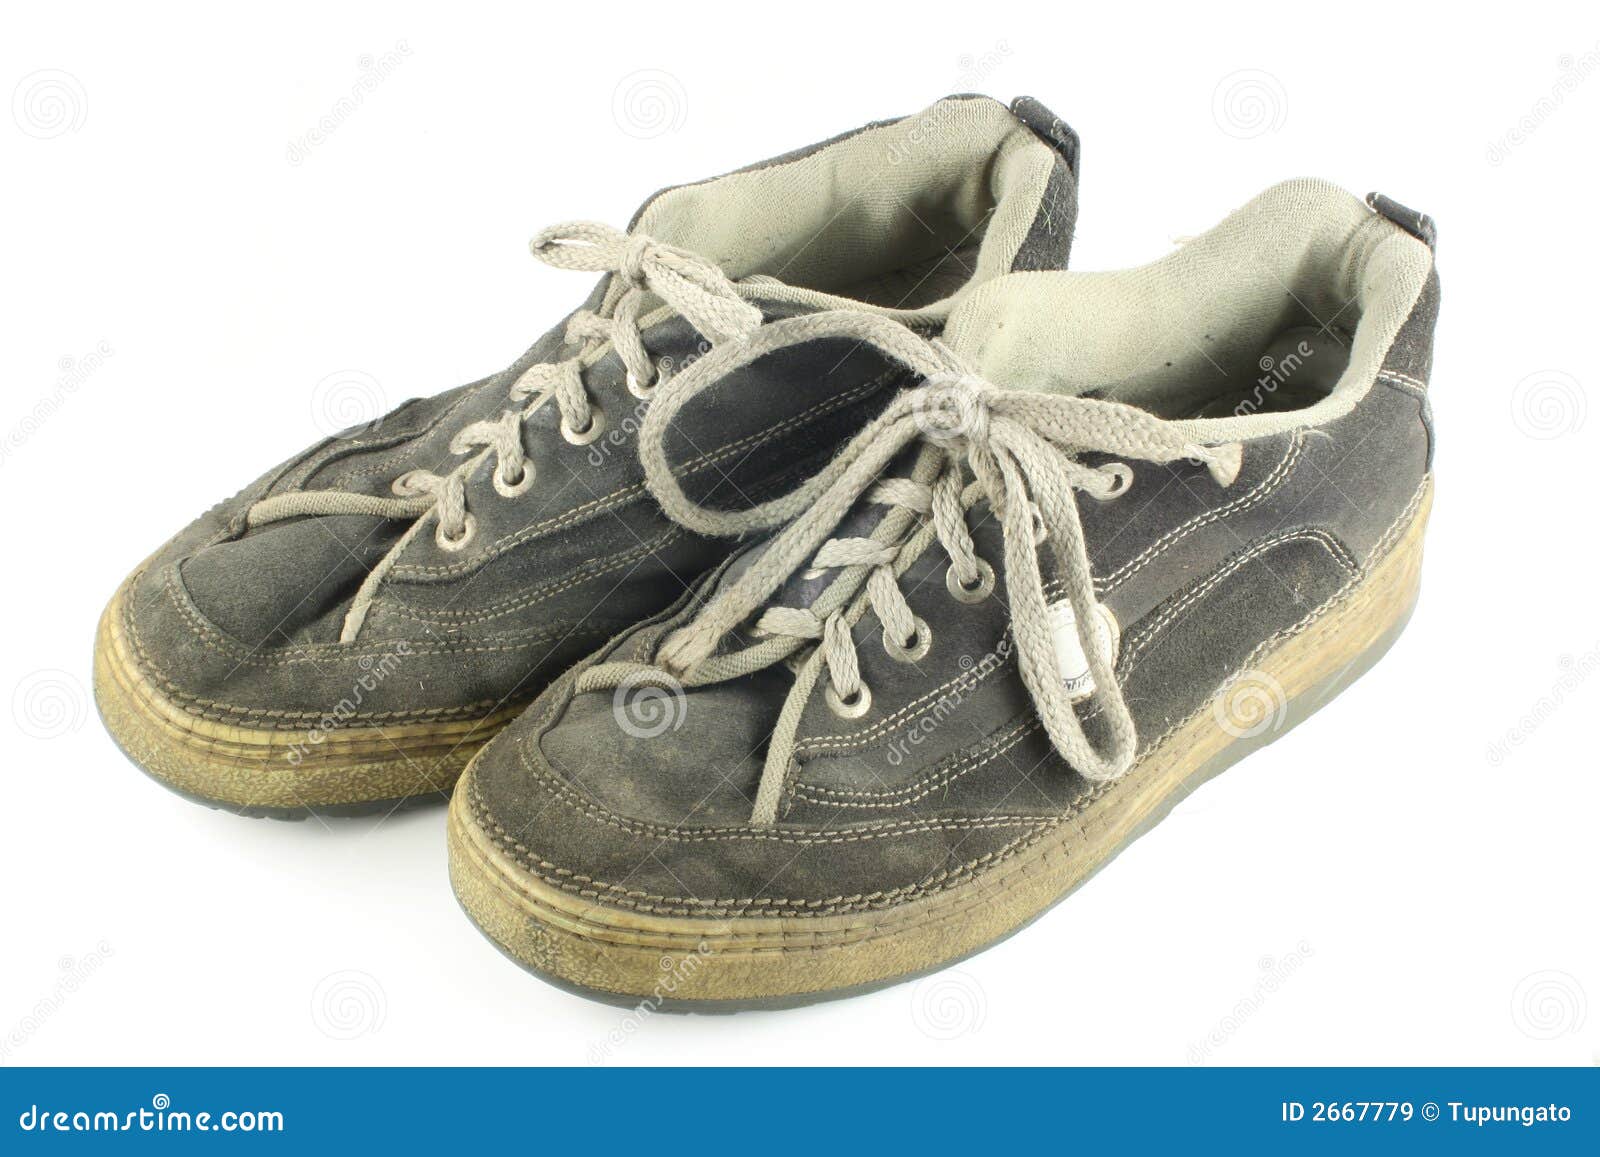 Pair of worn dirty shoes stock image. Image of equipment - 2667779